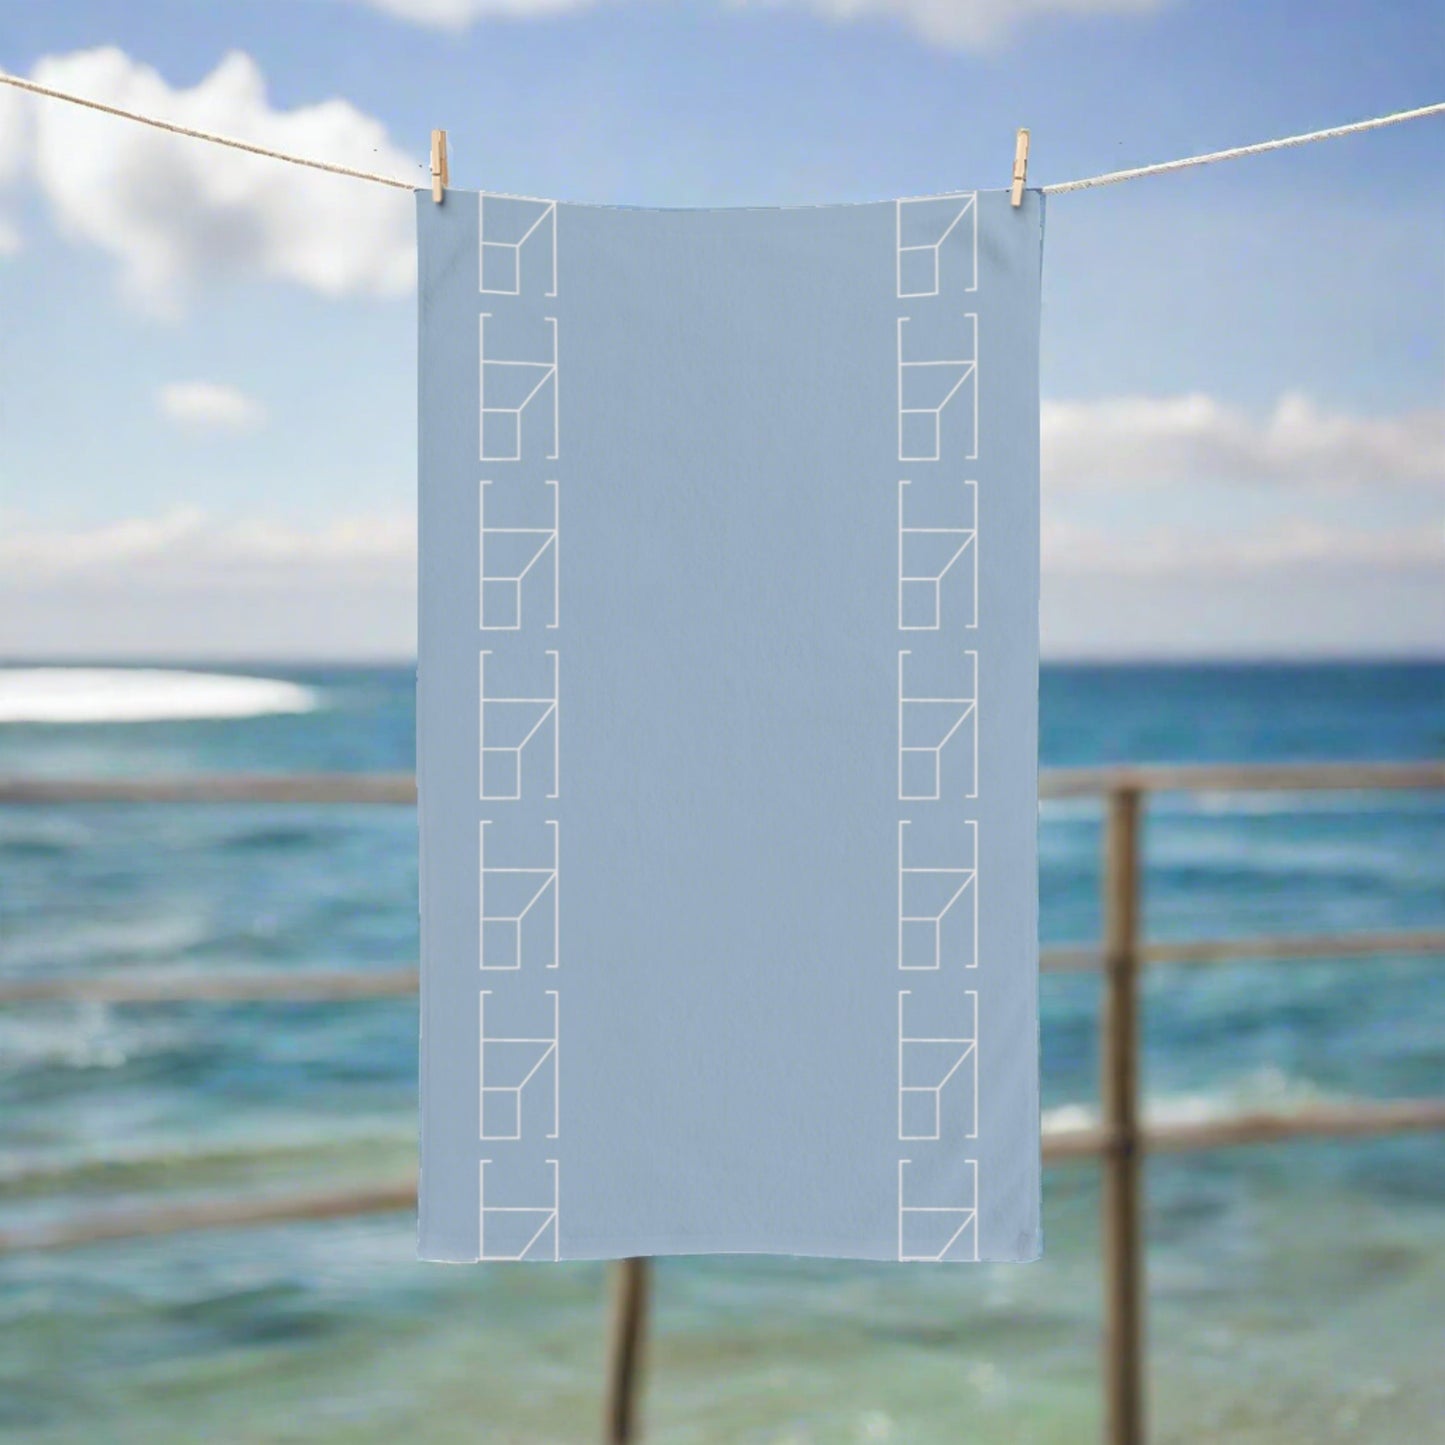 blue mist hand towel hanging from a rope outdoors, Imagine a relaxing beachside setting where the Blue Mist hand towel is hung by wooden clothespins on a rope strung between two weathered dock posts. The ocean's tranquil blues in the background mirror the towel's hue, and the gentle sea breeze animates the fabric, capturing the essence of a serene coastal retreat.